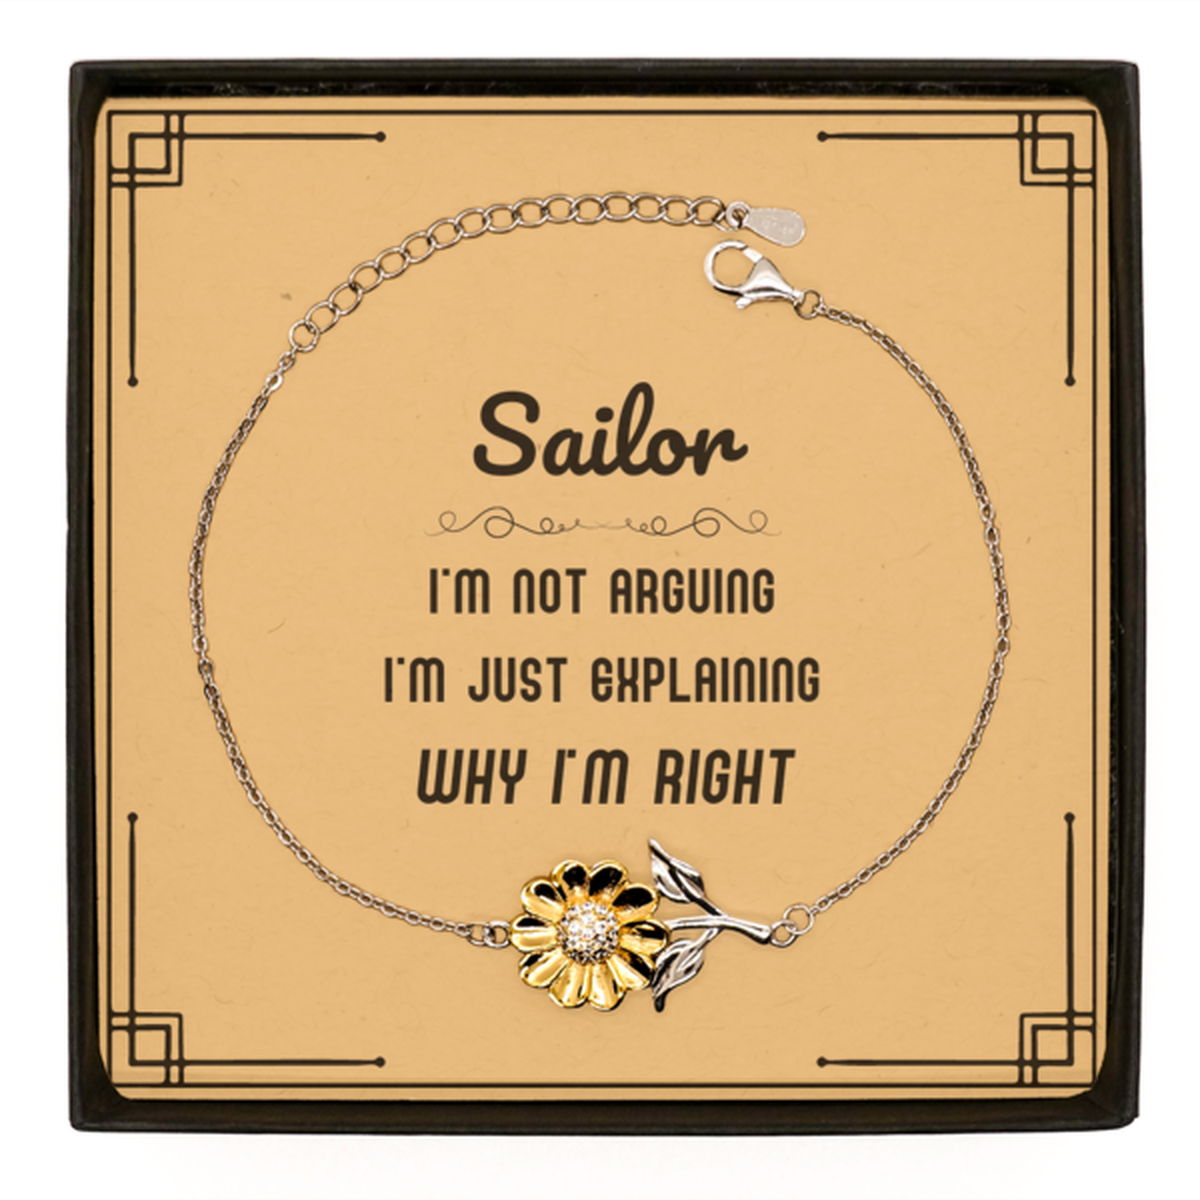 Sailor I'm not Arguing. I'm Just Explaining Why I'm RIGHT Sunflower Bracelet, Funny Saying Quote Sailor Gifts For Sailor Message Card Graduation Birthday Christmas Gifts for Men Women Coworker